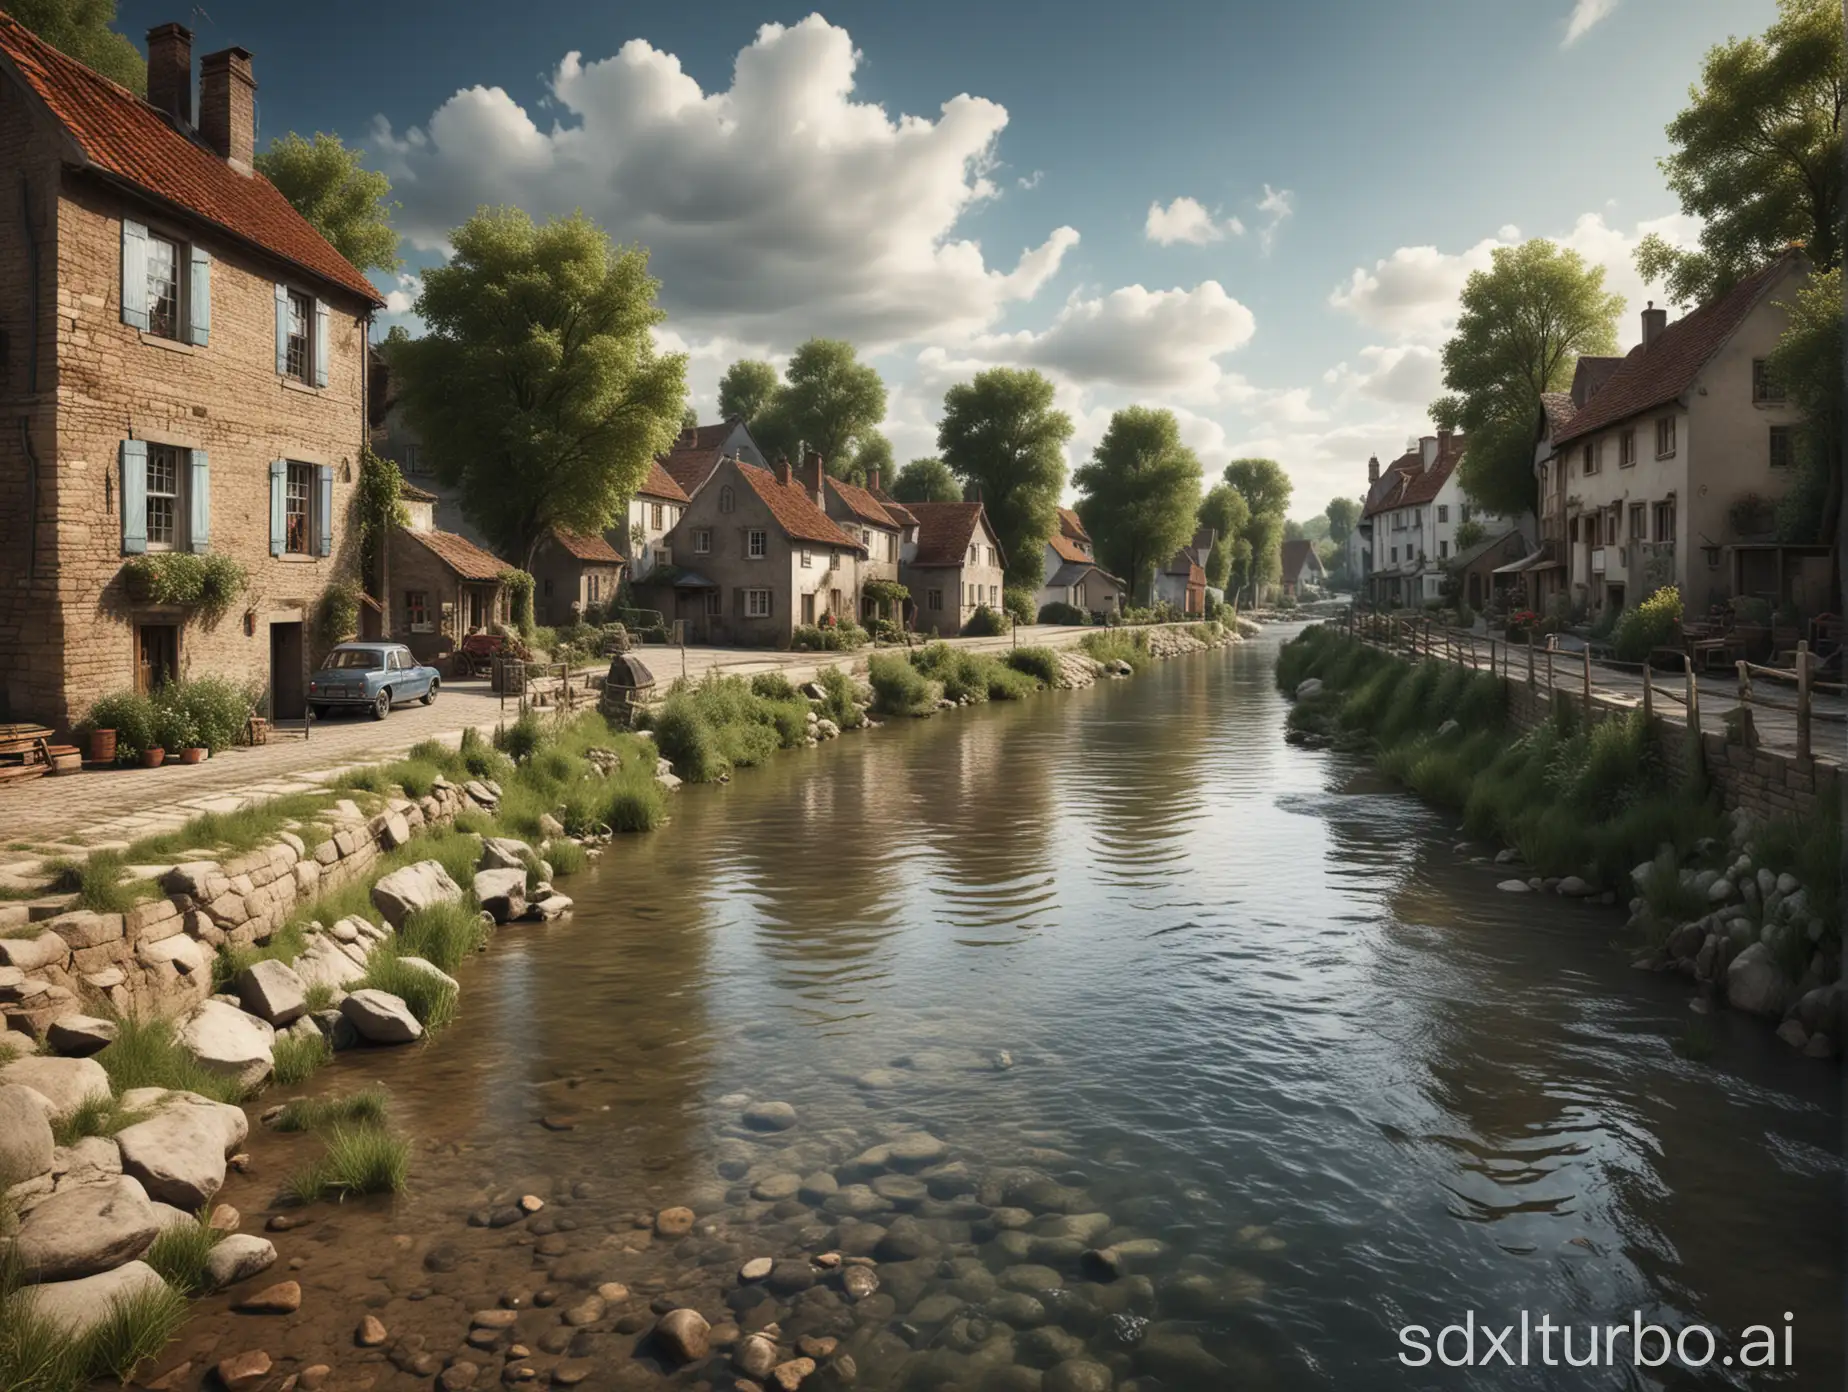 create a photo of a picturesque and clean river scene in the middle of a village using hyper realistic photography